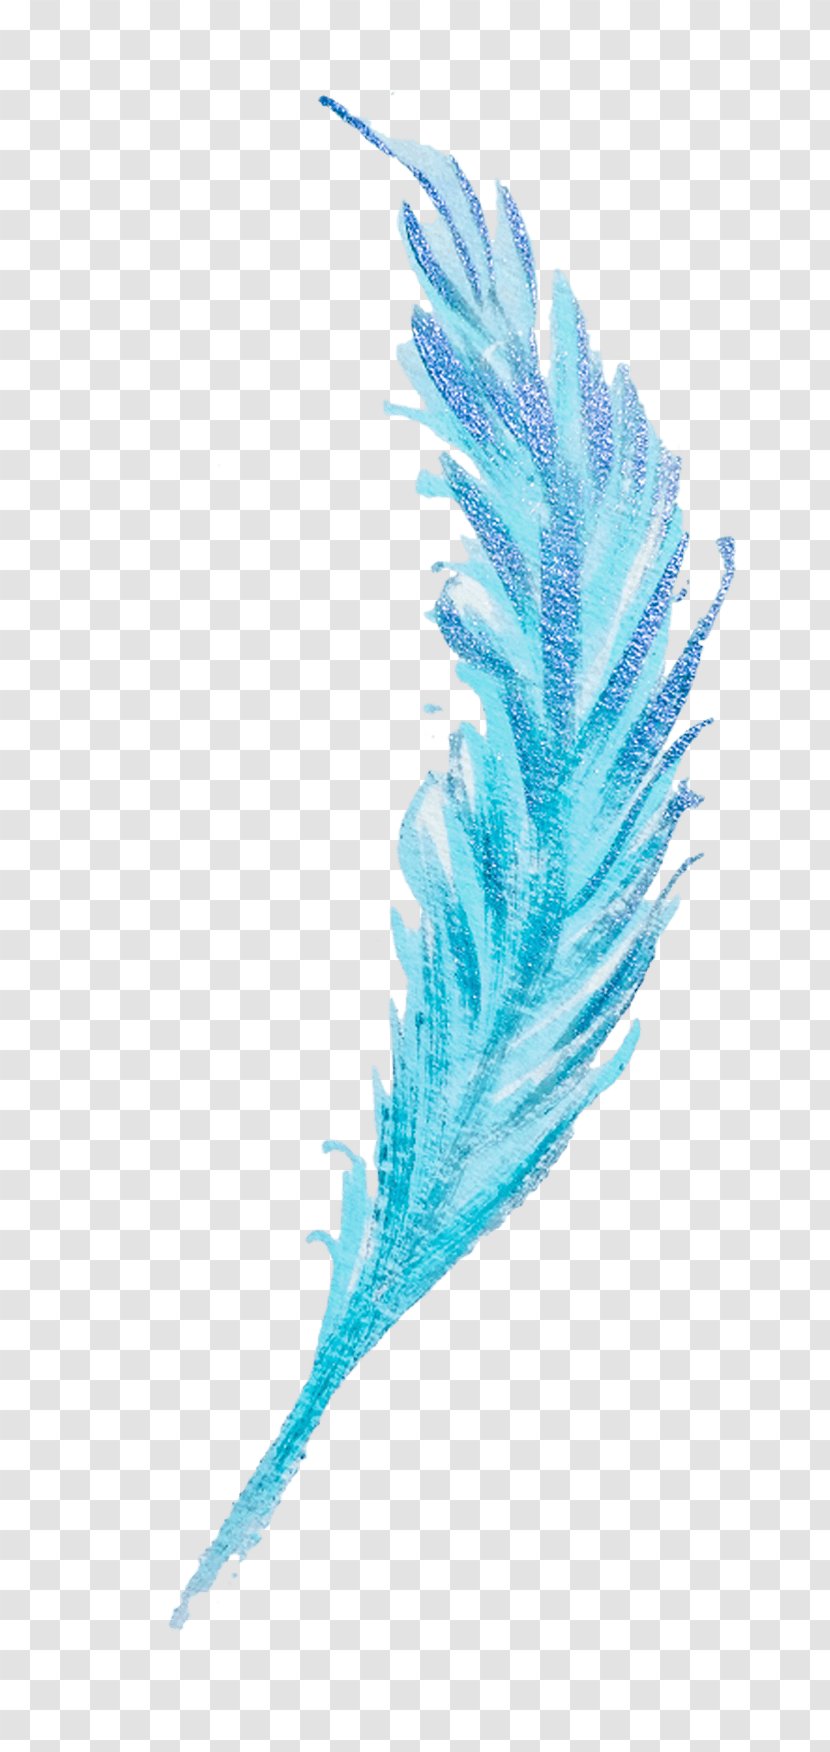 Feather Image Watercolor Painting Design - Turquoise - Falling Feathers Transparent PNG